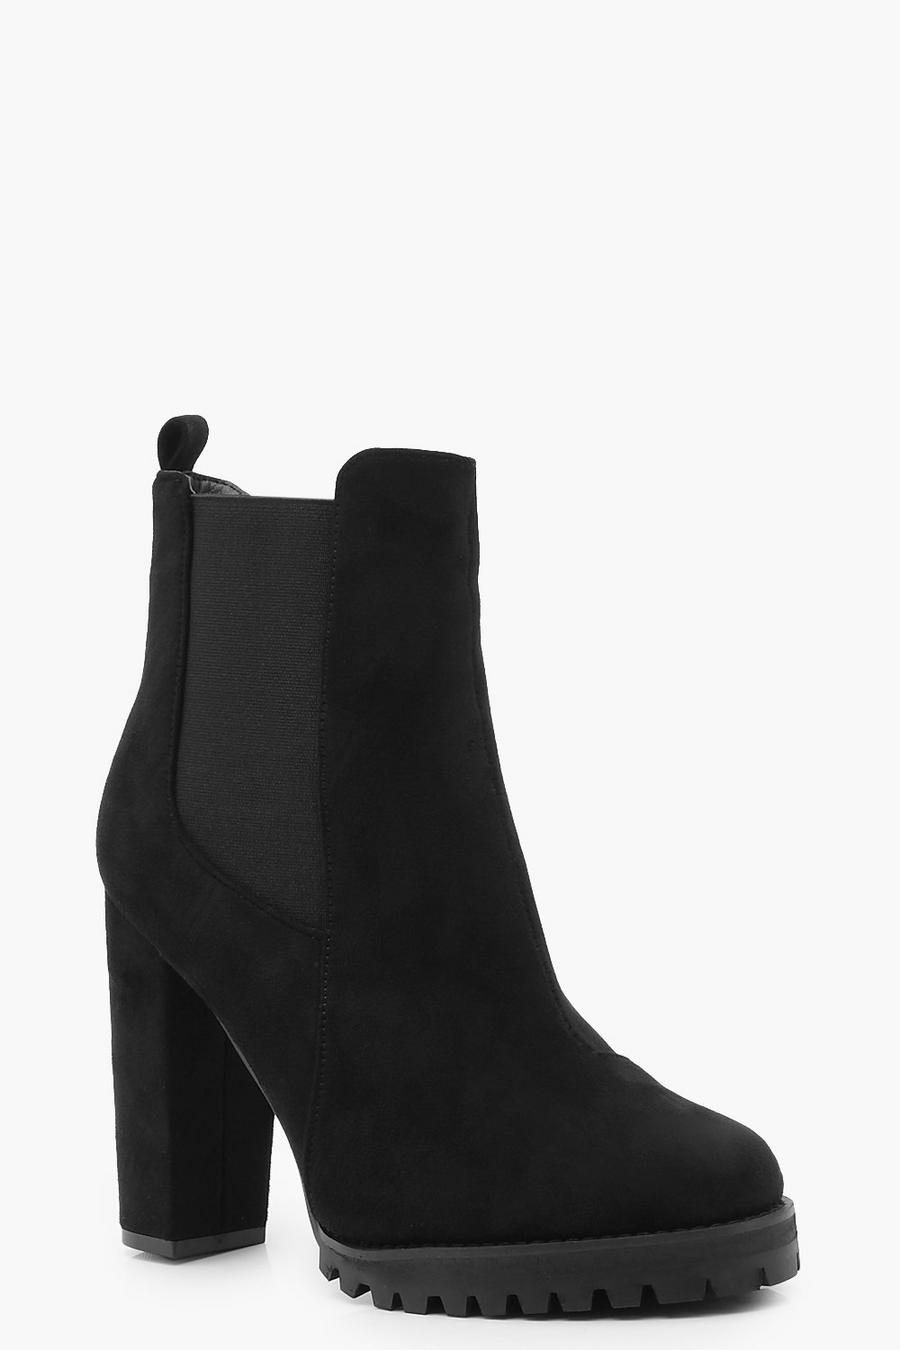 Black Cleated Platform Suedette Pull On Chelsea Boots image number 1